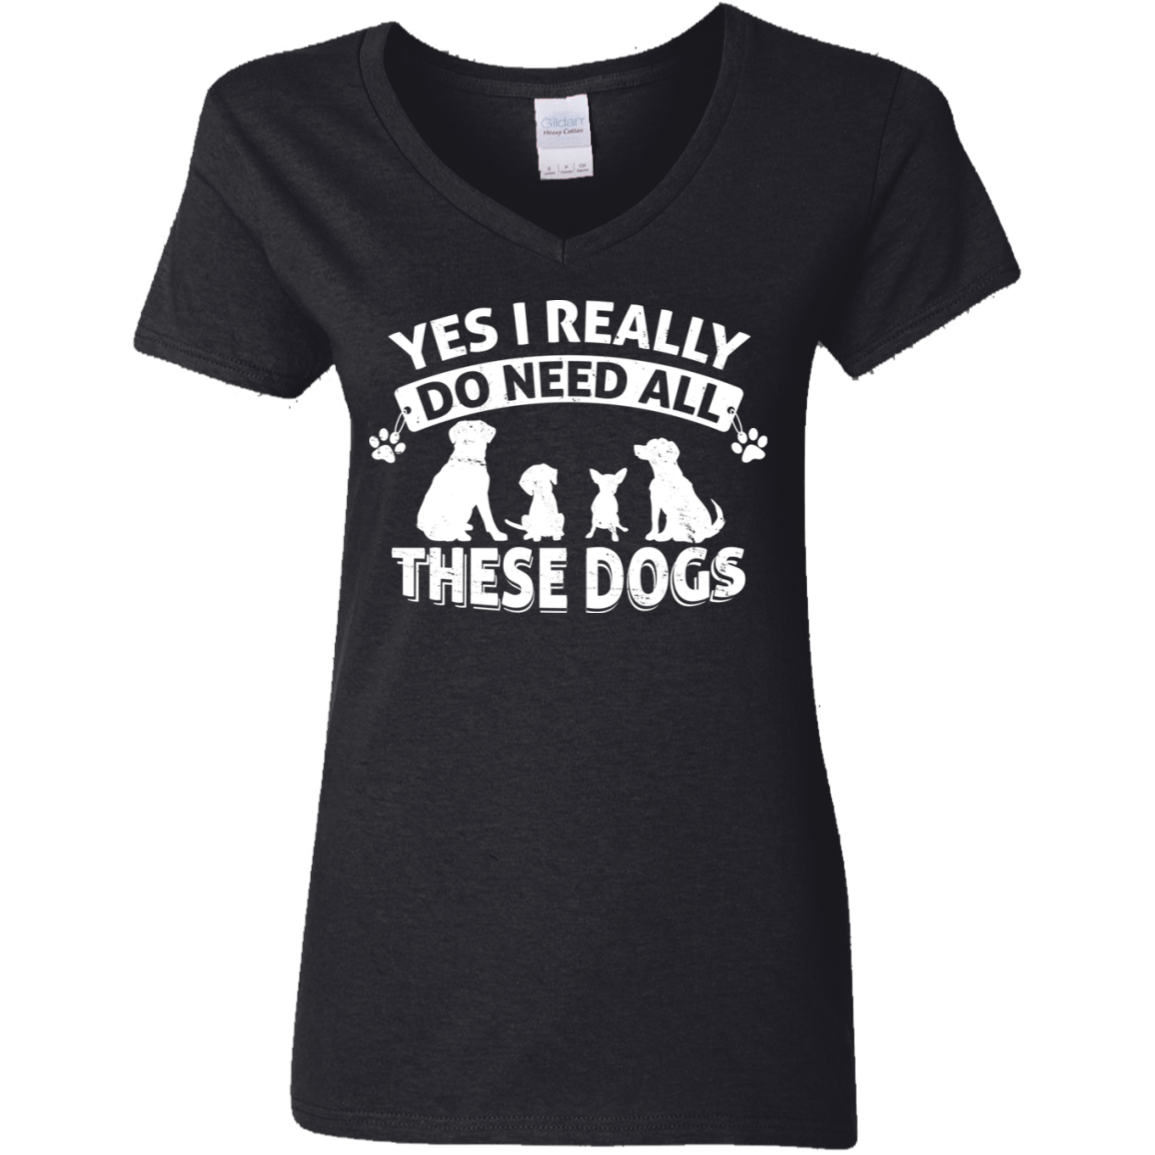 Yes I Do Need All These Dogs - Ladies V Neck.